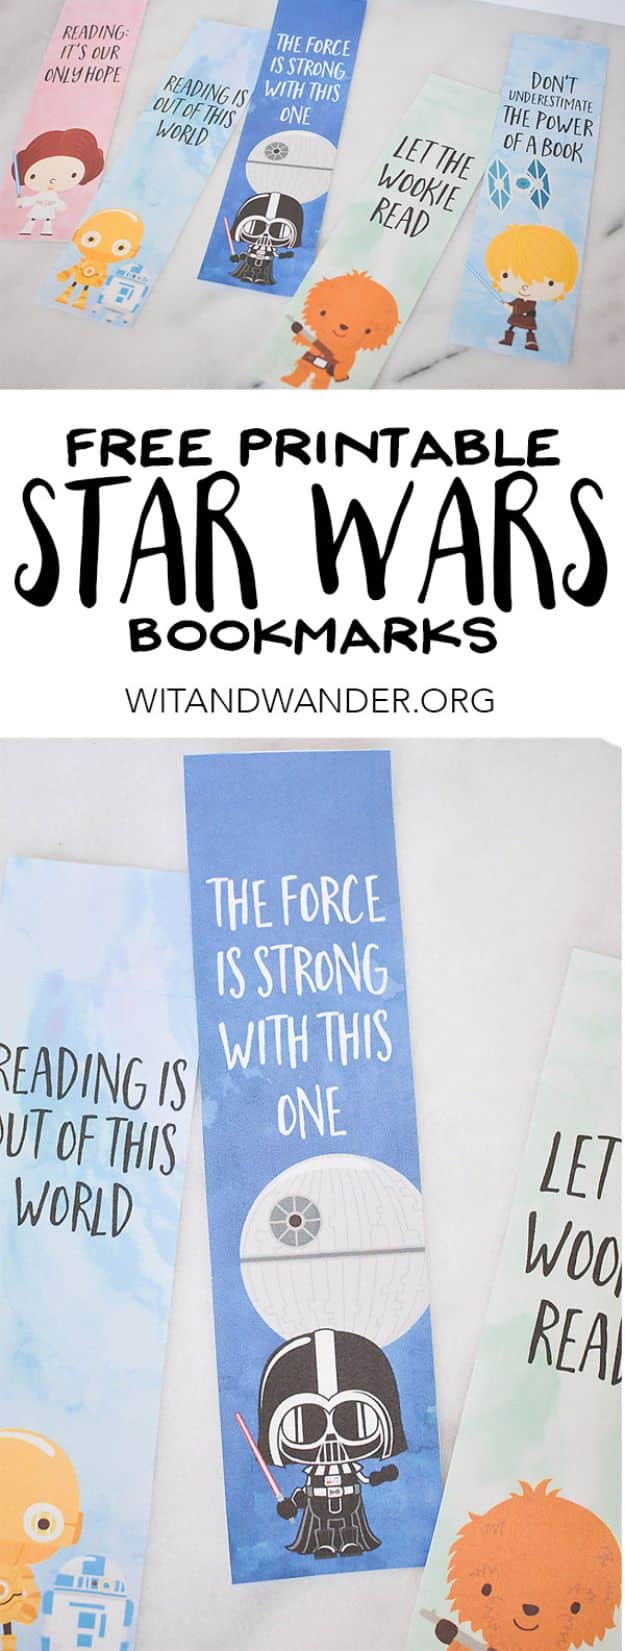 Best Free Printables for Crafts - Star Wars Bookmark Free Printable - Quotes, Templates, Paper Projects and Cards, DIY Gifts Cards, Stickers and Wall Art You Can Print At Home - Use These Fun Do It Yourself Template and Craft Ideas 